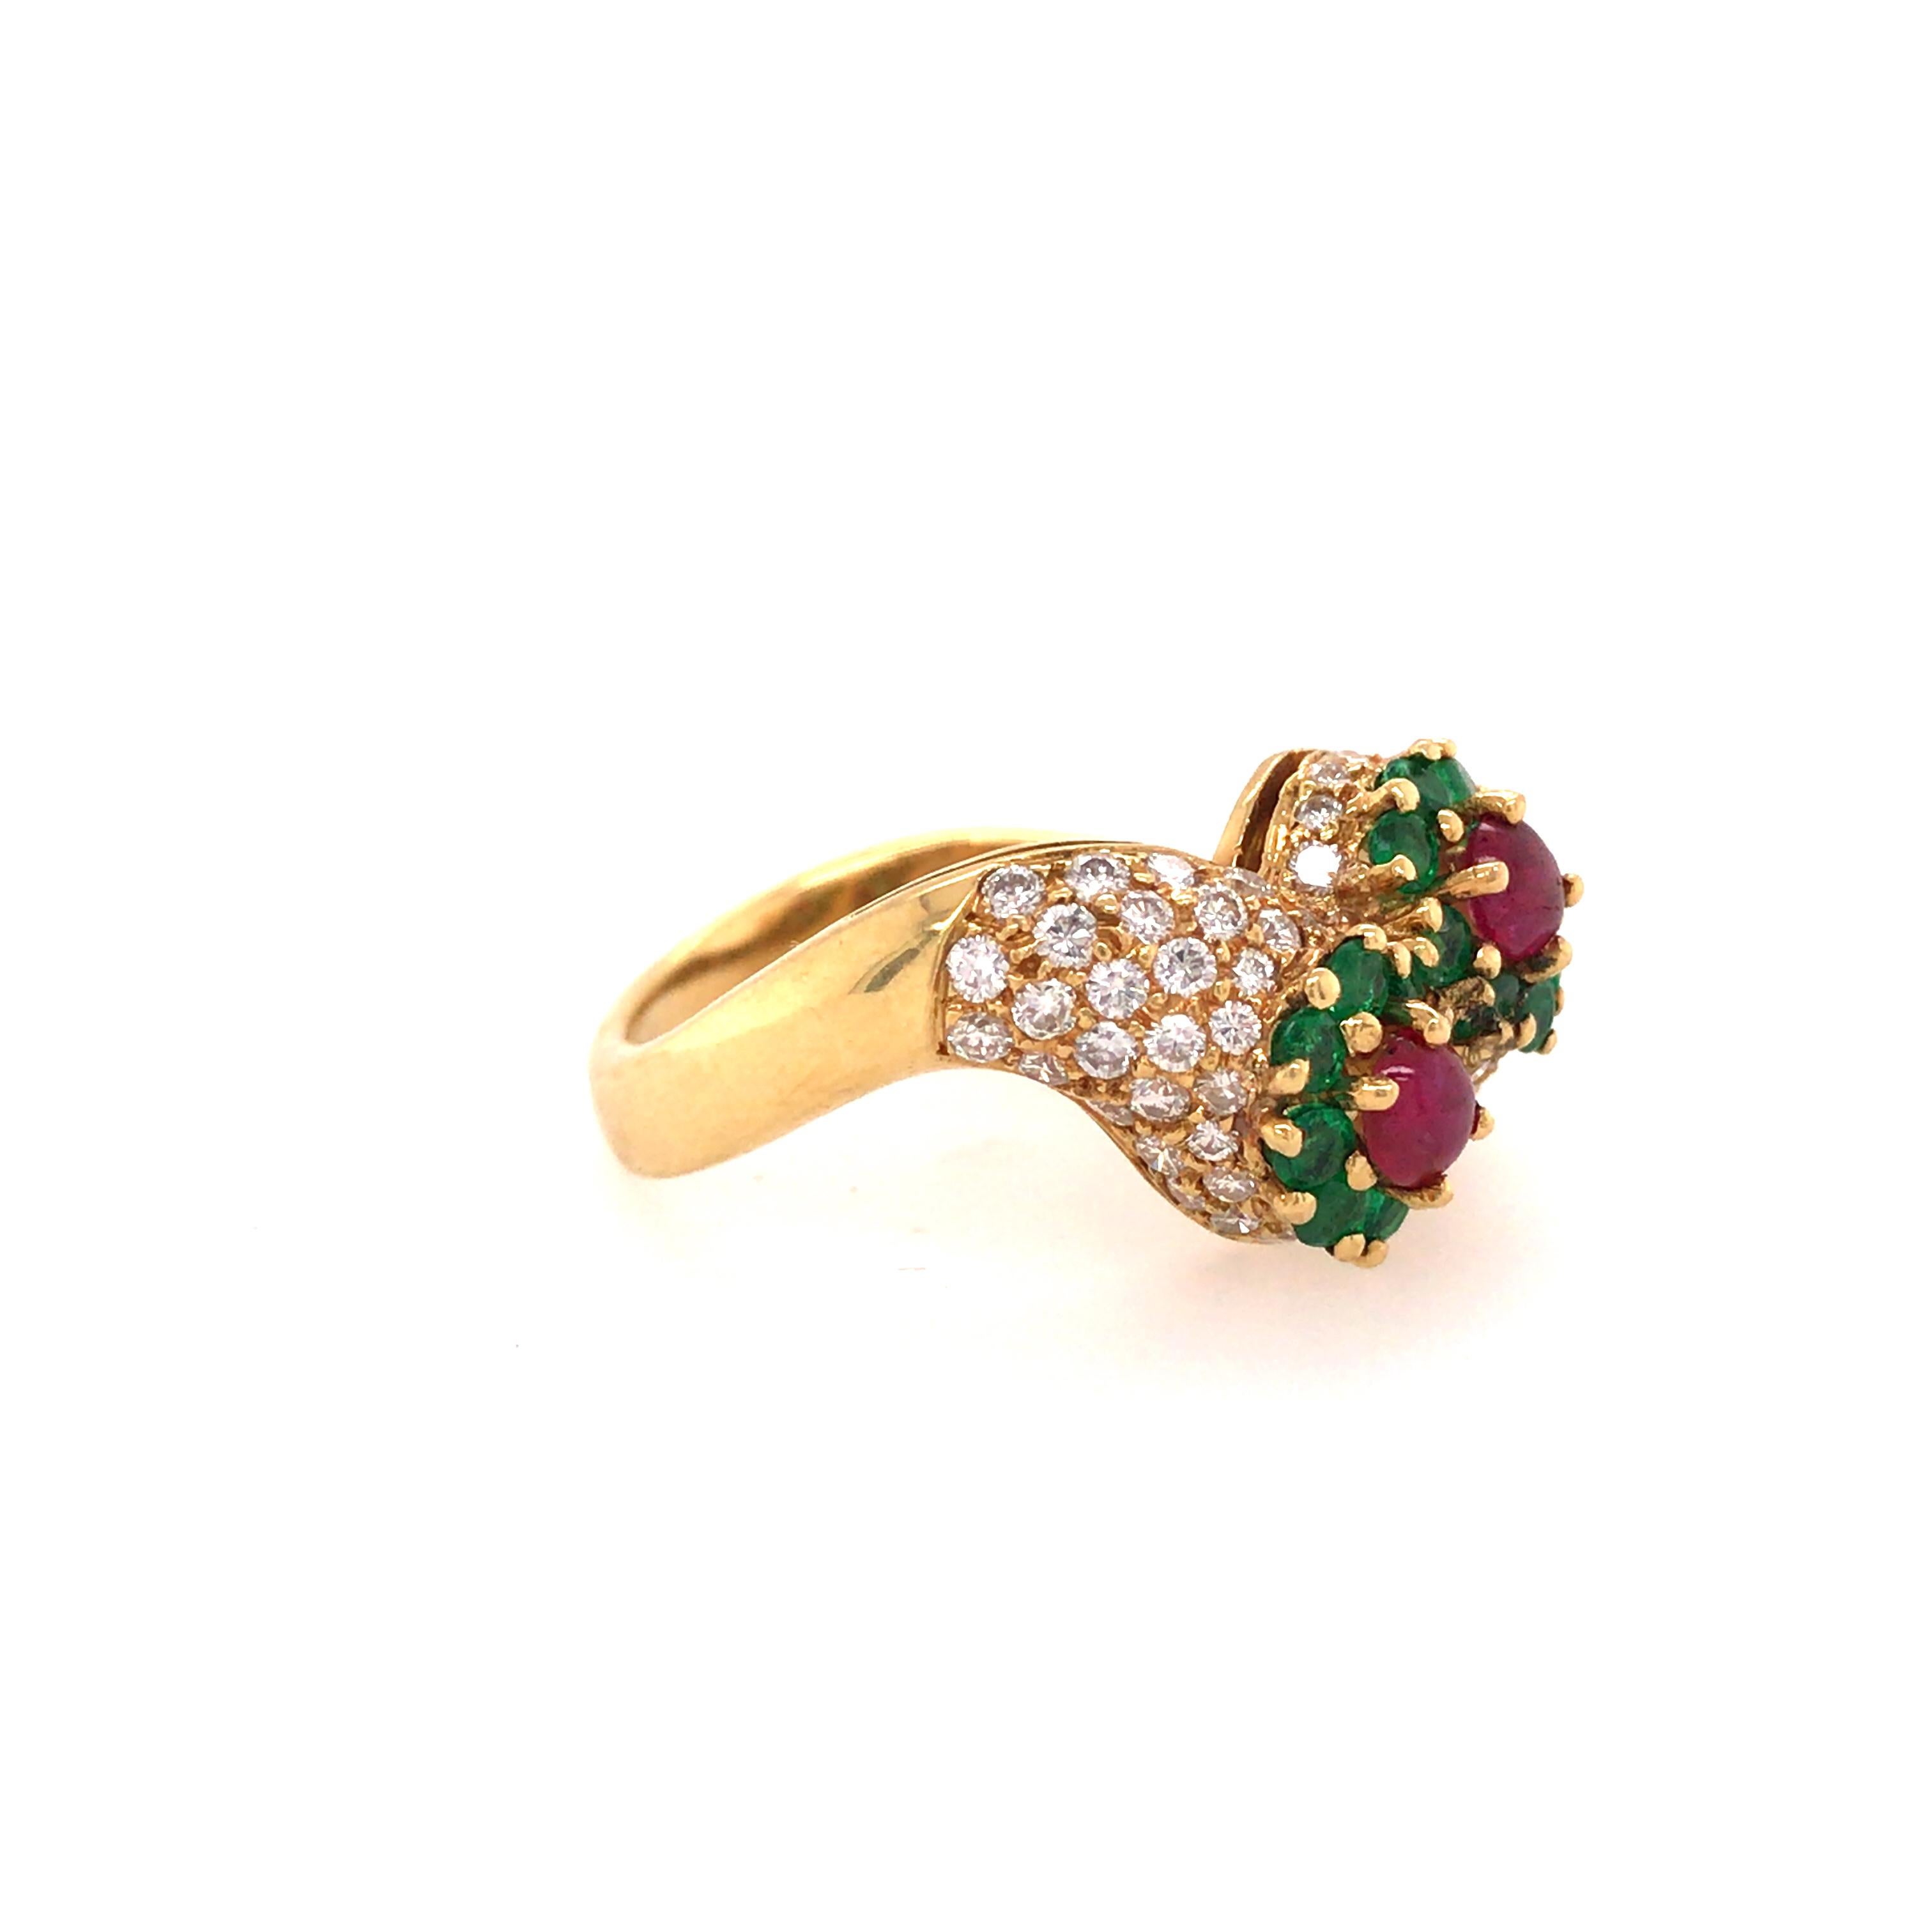 Diamond, Emerald and Ruby Ring in 18K Yellow Gold.  (68) Round Brilliant Cut Diamonds weighing 1.05 carat total weight, G-H in color and VS in clarity, (16) Emeralds weighing 1.03 carat total weight and (2) Ruby Gemstones weighing .65 carat total